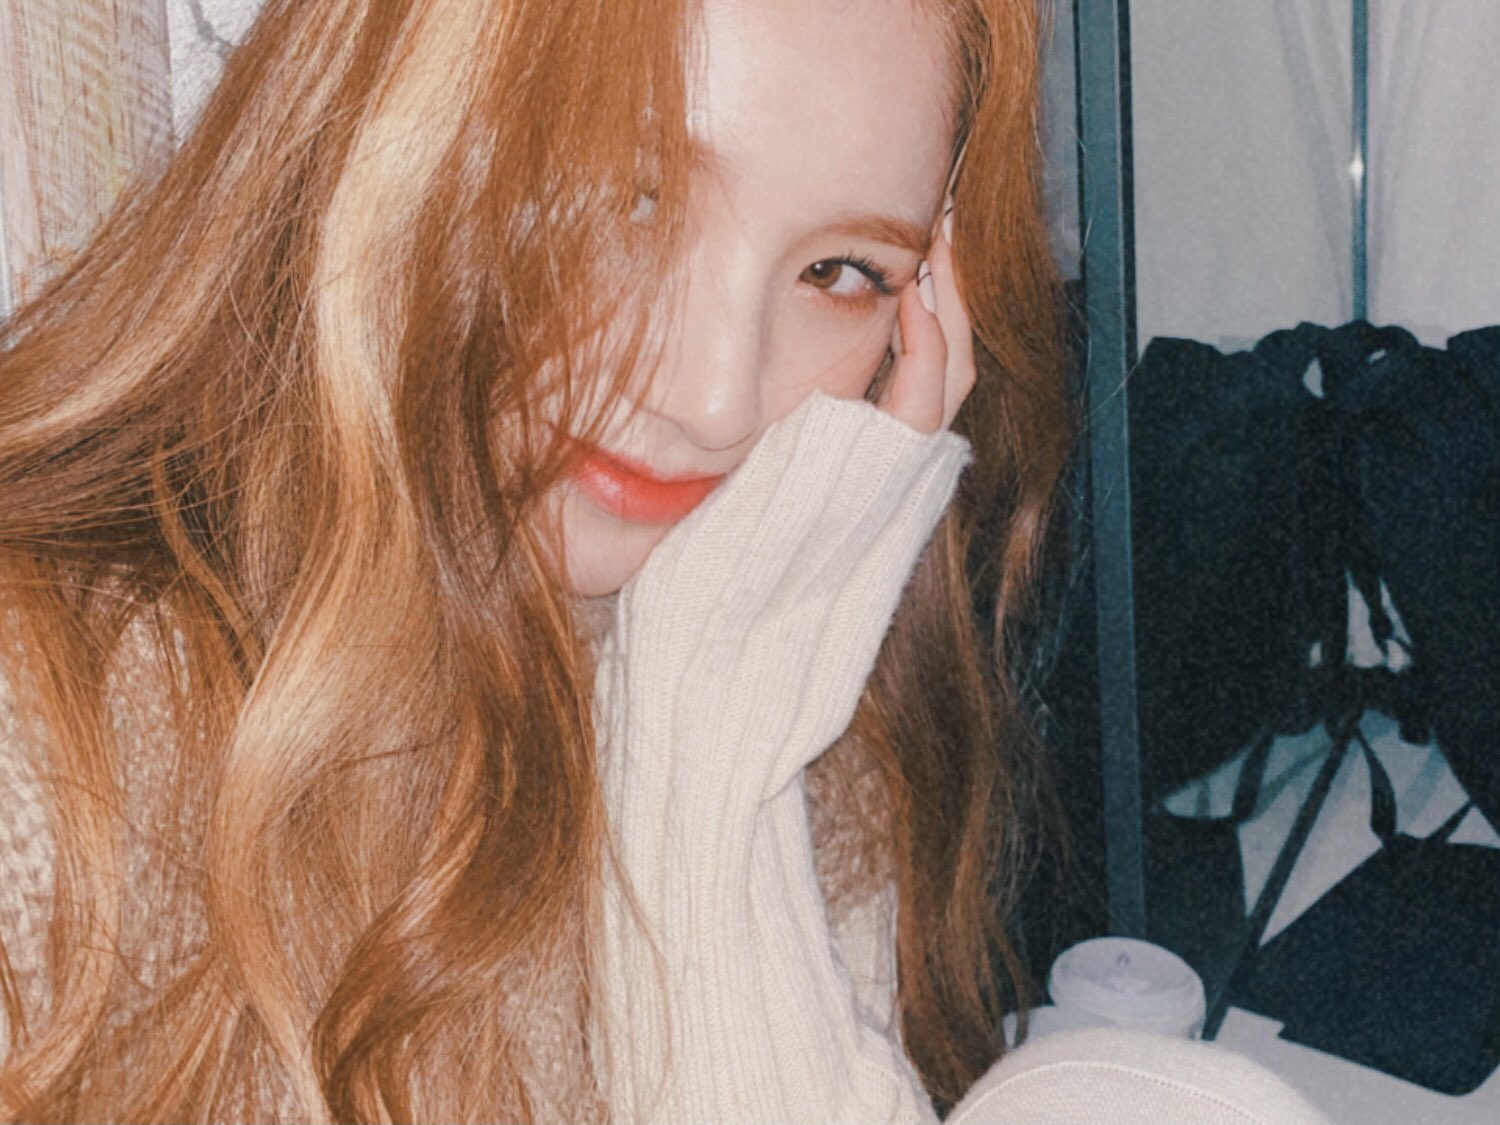 LOONA 'Star' enters top 30 North American radio charts for 6 consecutive weeks